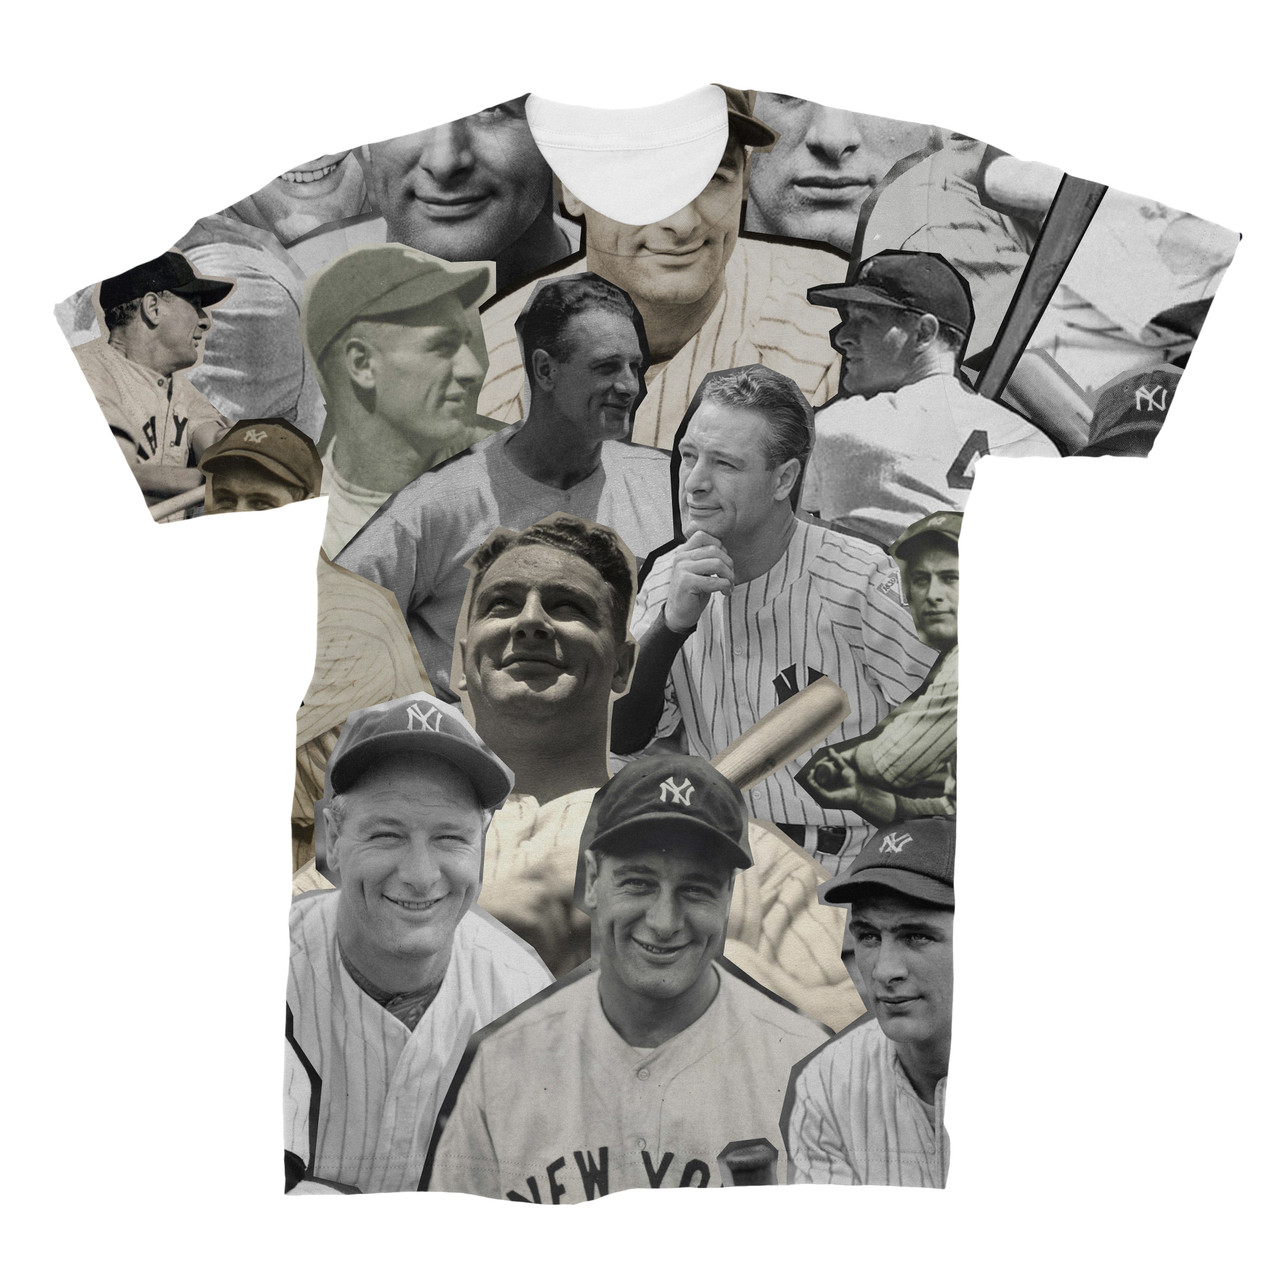 Lou Gehrig Photo Collage T-Shirt - Subliworks